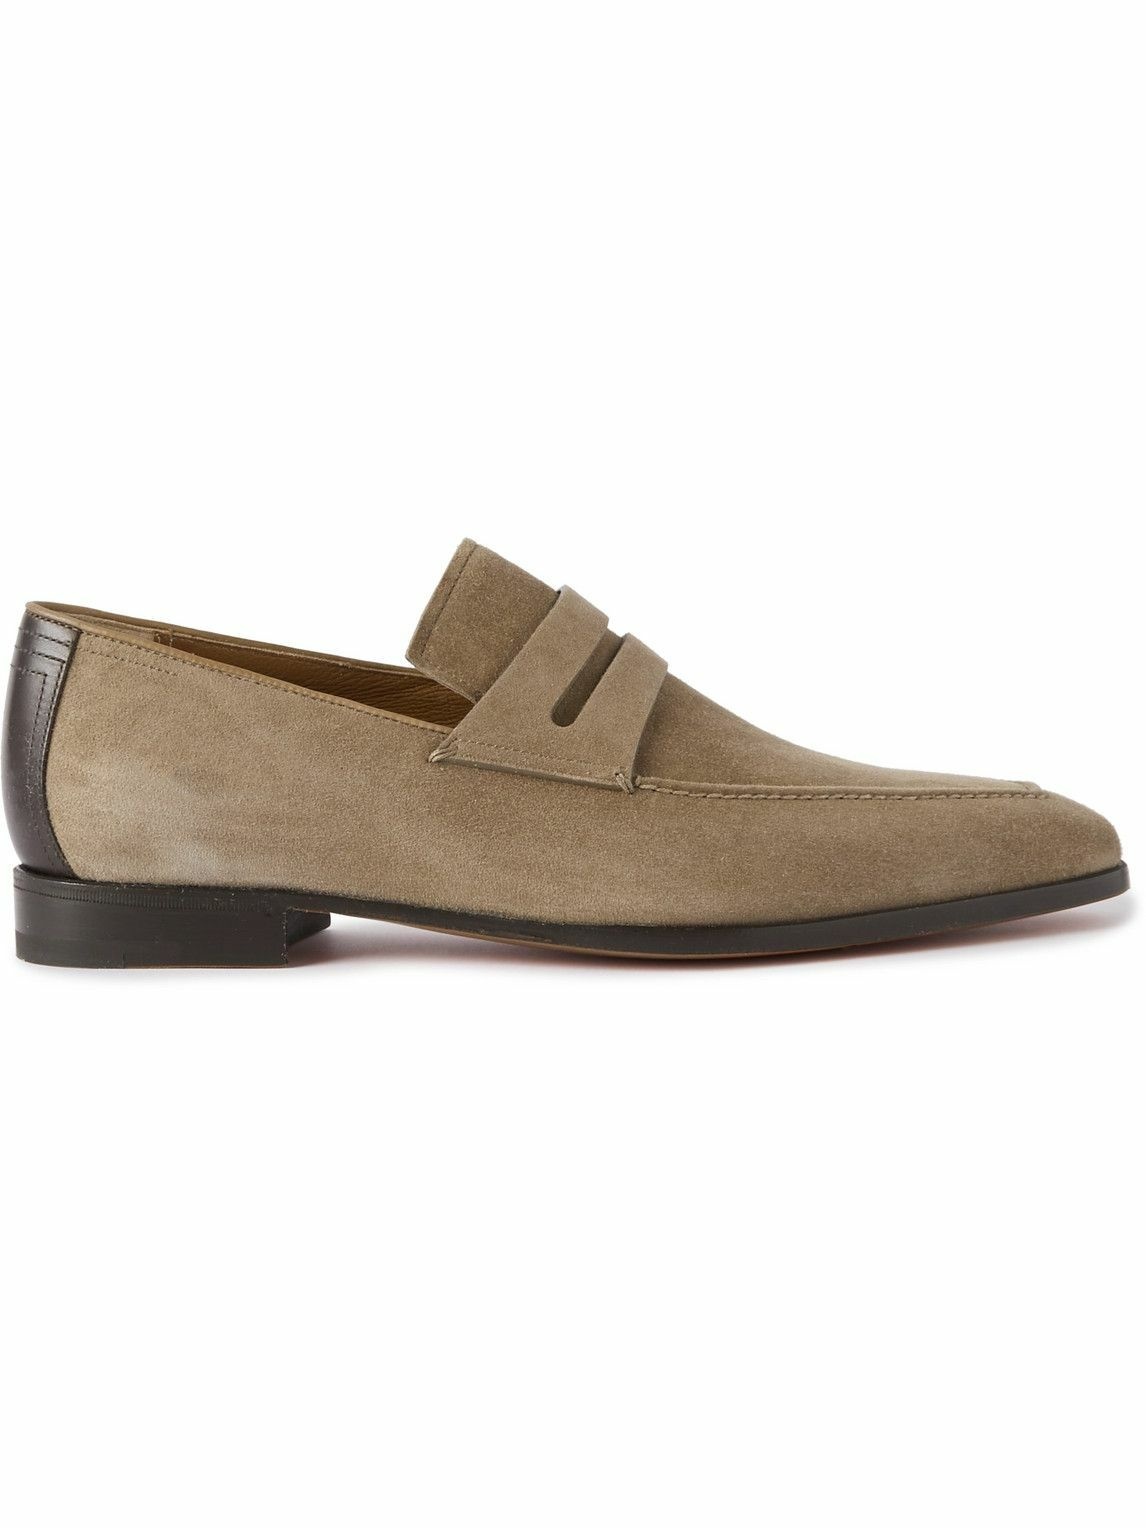 Photo: Berluti - Leather-Trimmed Suede Penny Loafers - Brown